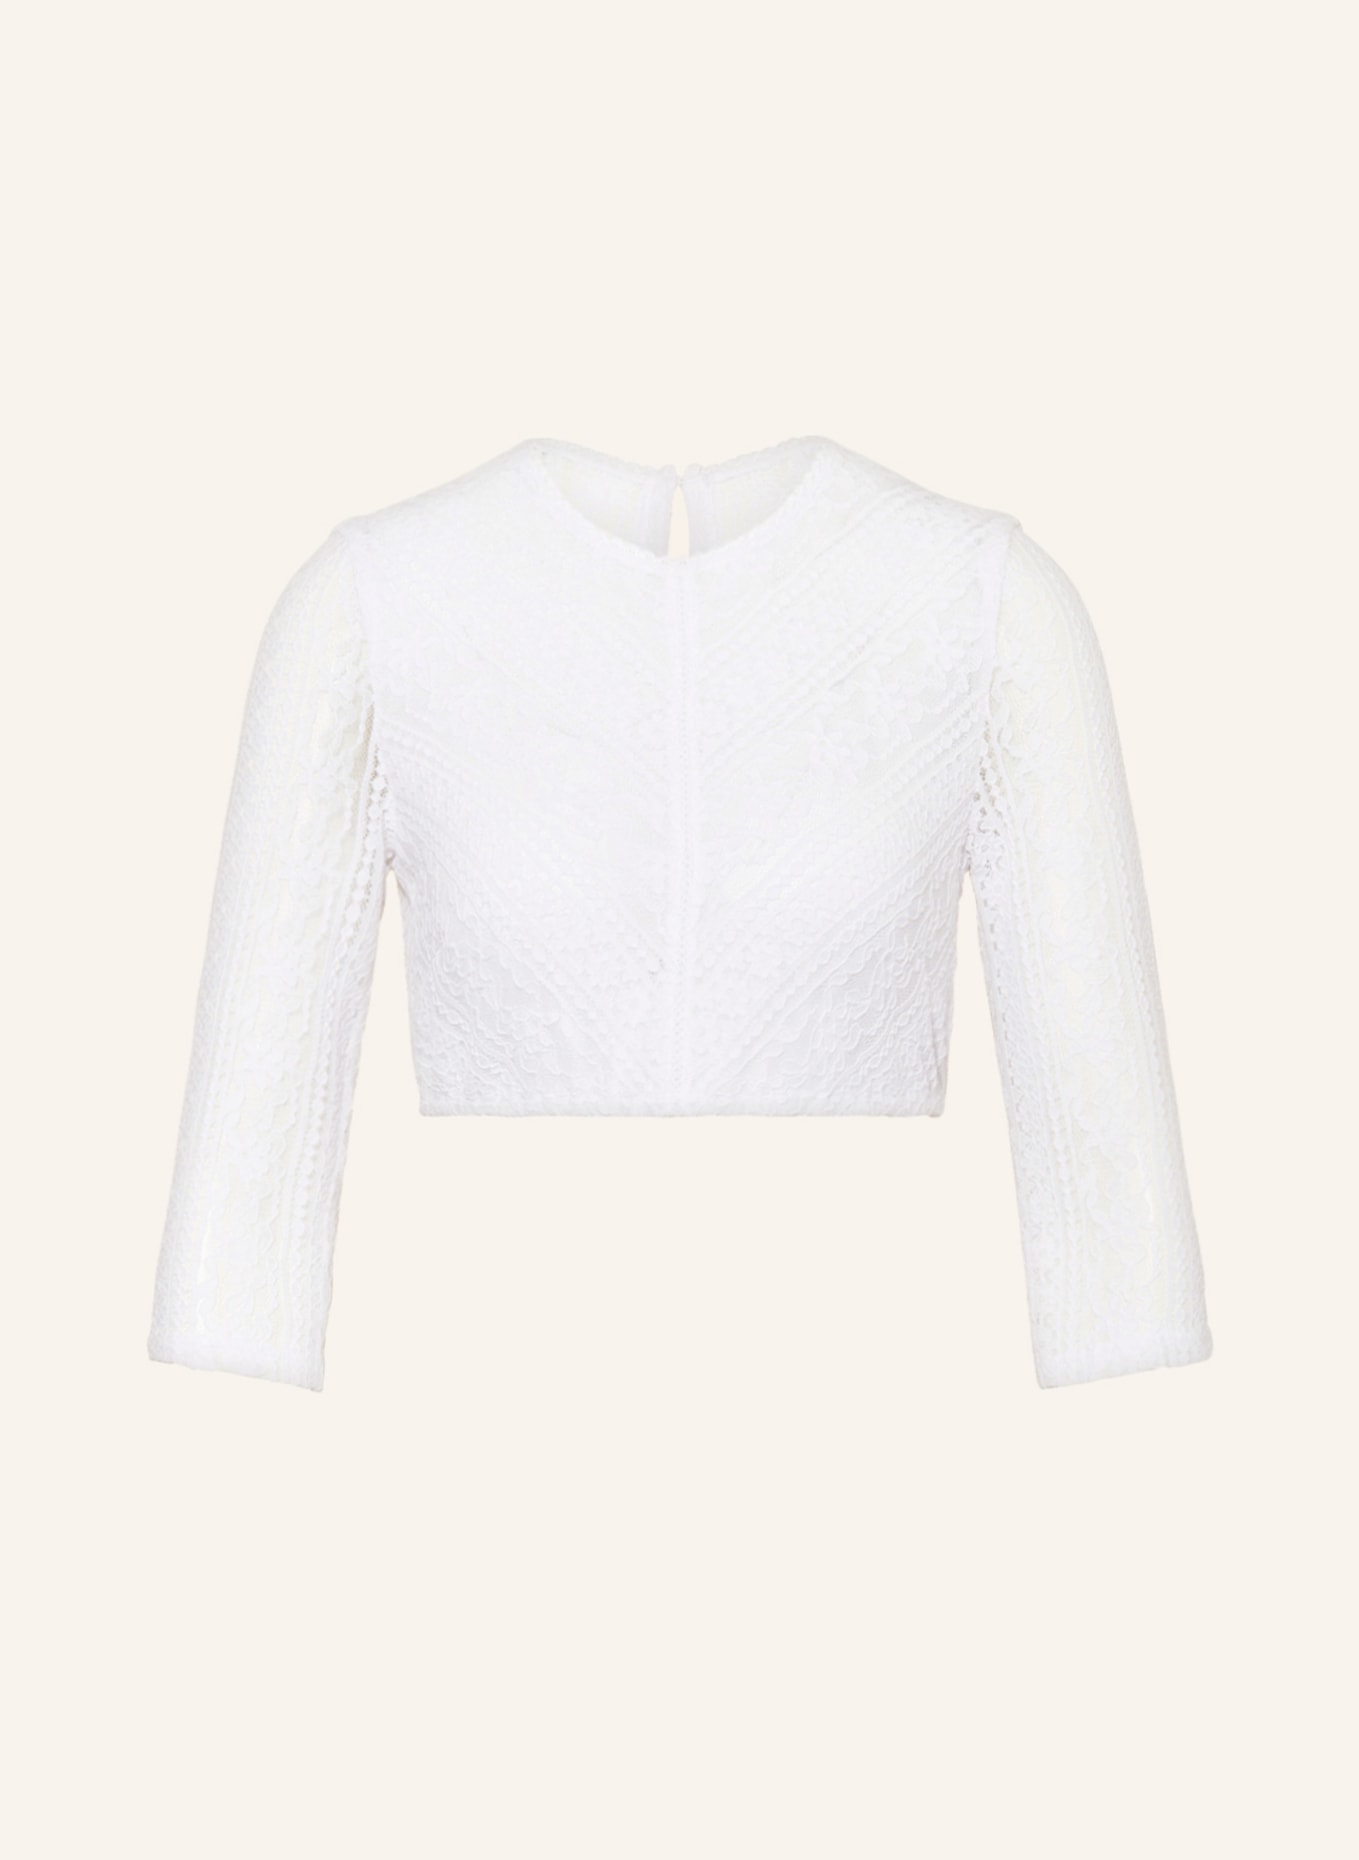 WALDORFF Dirndl blouse made of lace with 3/4 sleeves, Color: WHITE (Image 1)